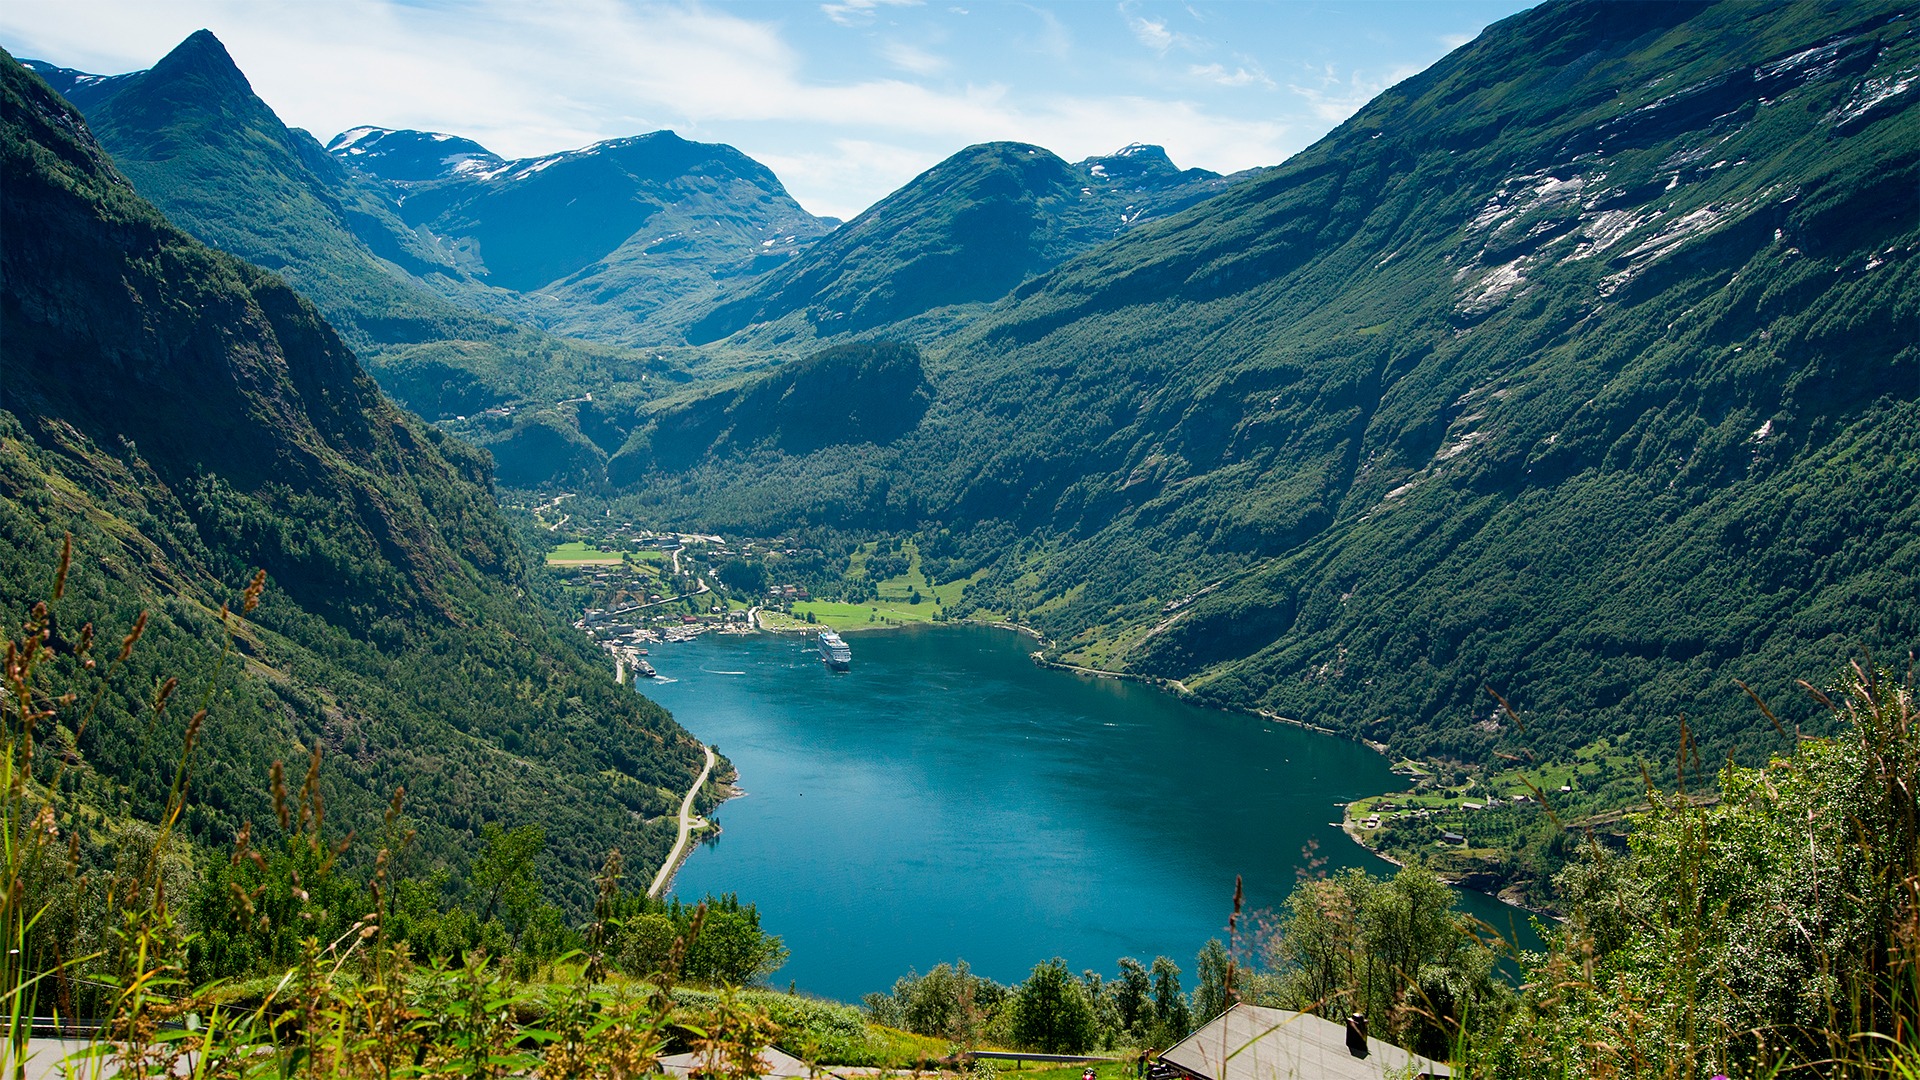 The Geirangerfjord is part of the West Norwegian Fjords area, which is inscribed on the UNESCO World Heritage List. Photo: Ludovic Péron (CC BY-SA), via Wikimedia Commons.